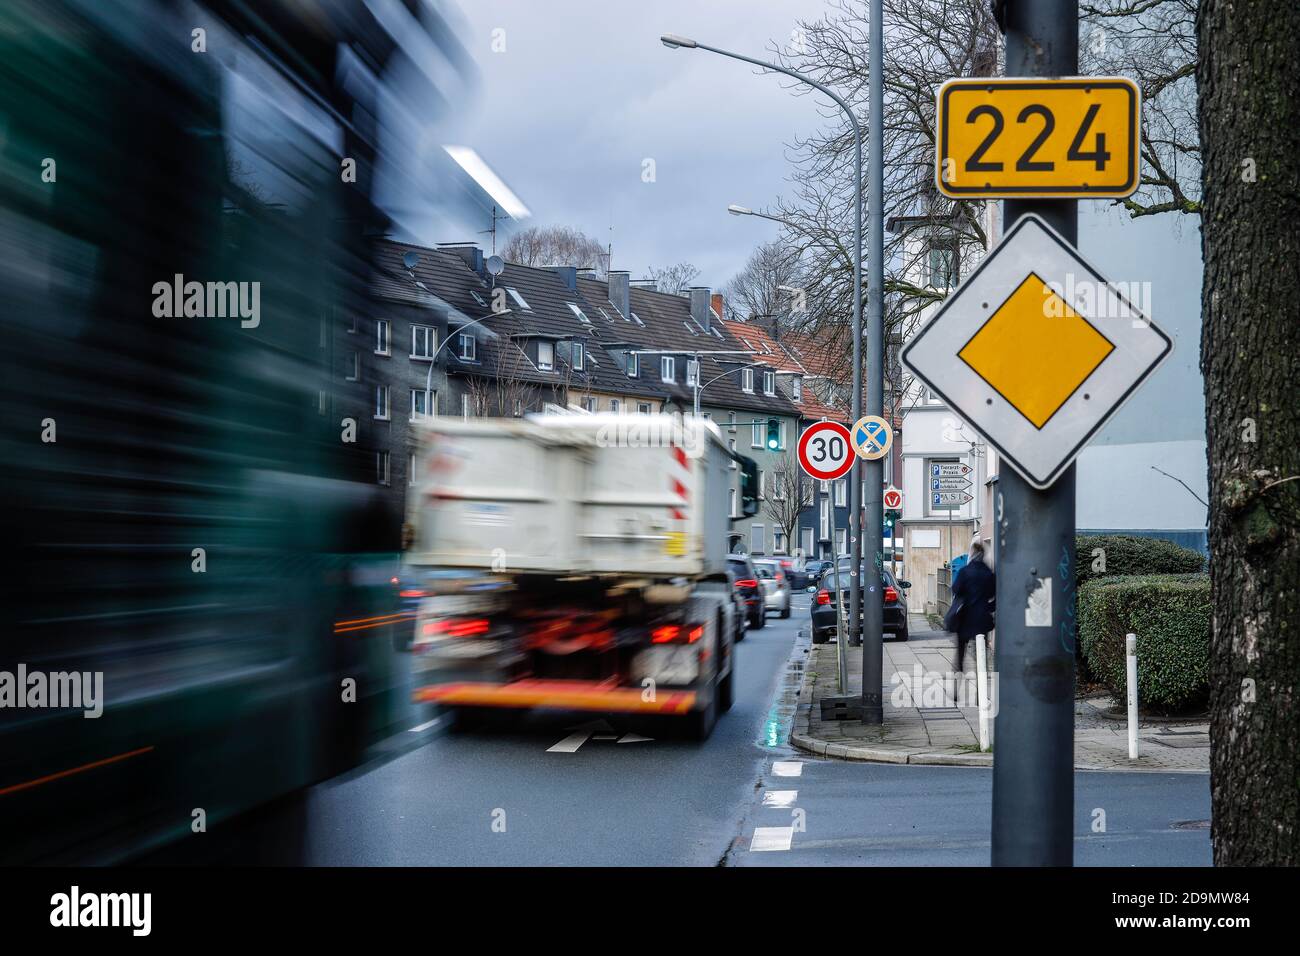 Rush hour traffic in the environmental zone on the Bundesstrasse B 224 Alfredstrasse in Essen Rüttenscheid, on a test basis, Tempo 30 applies on a section there, Essen, Ruhr area, North Rhine-Westphalia, Germany Stock Photo